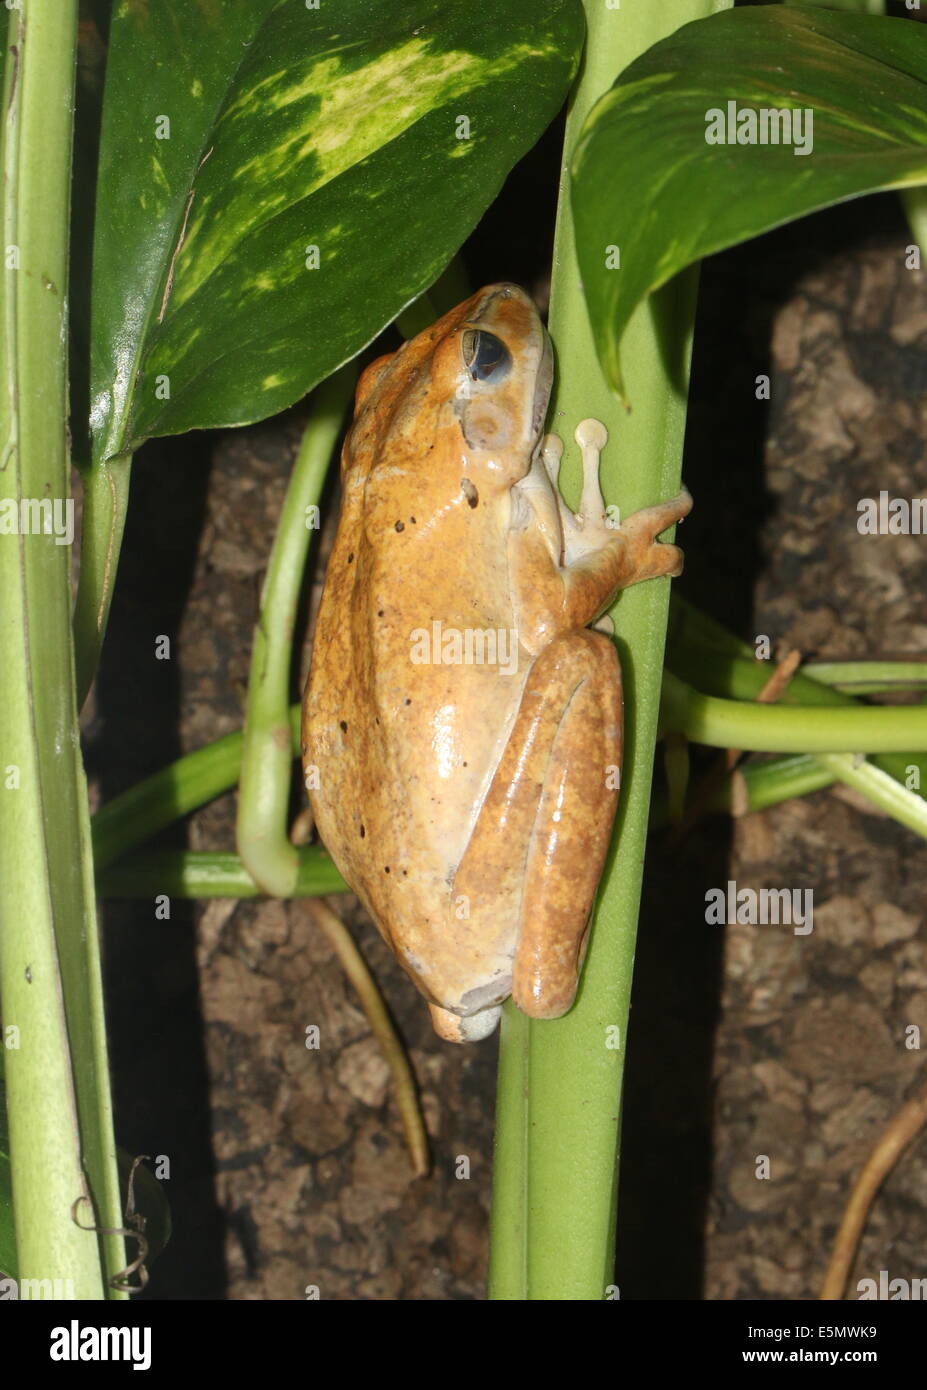 Common Tree Frog or Four-lined tree frog (Polypedates leucomystax) close-up Stock Photo